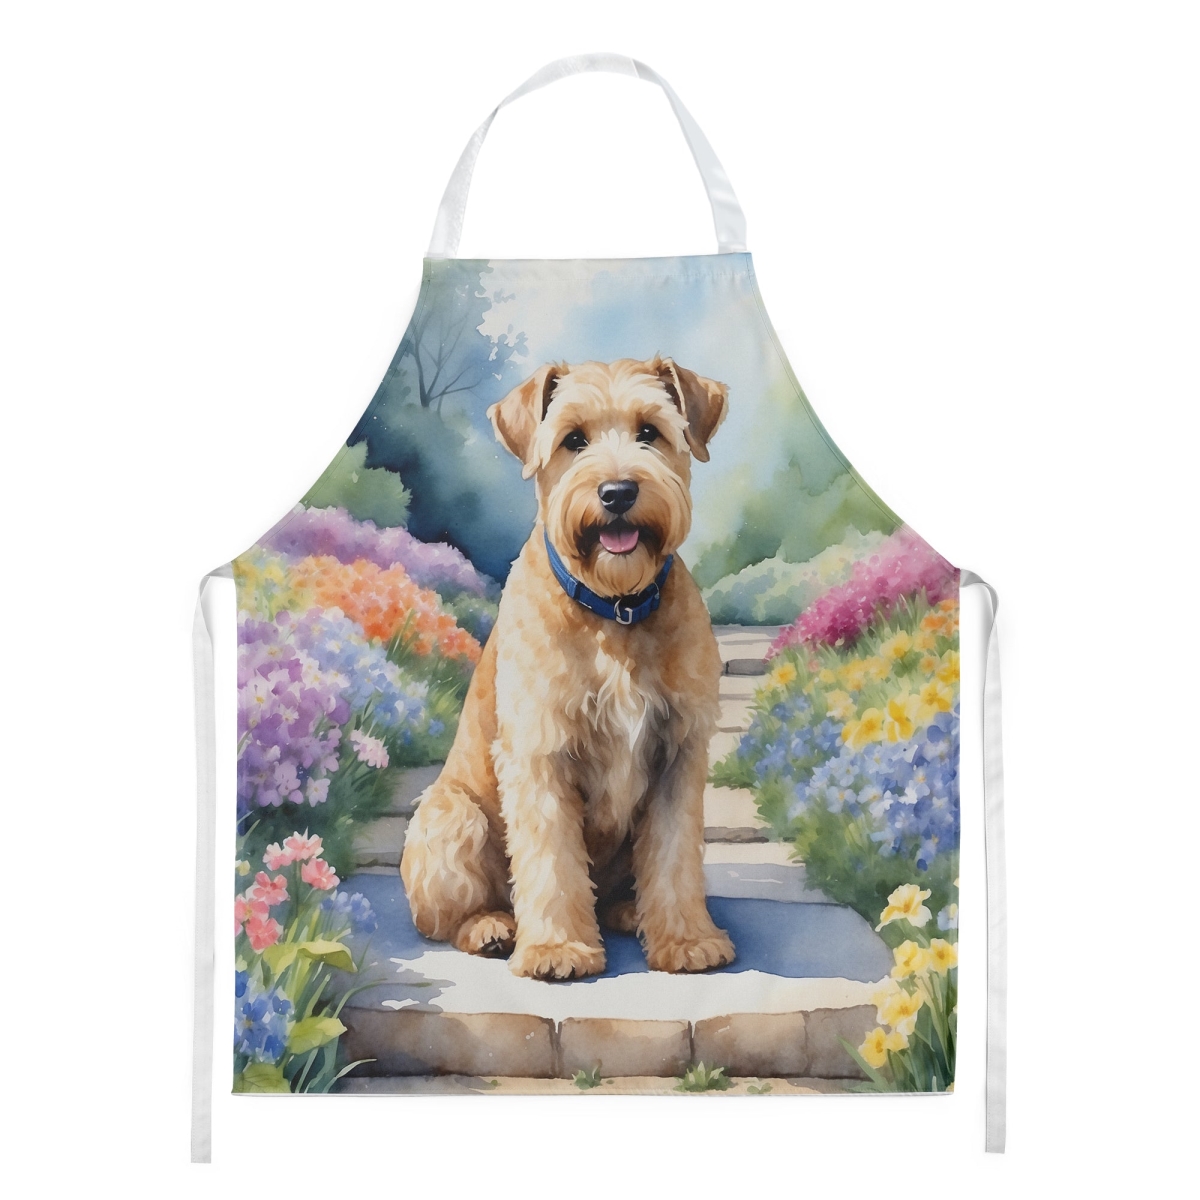 Picture of Carolines Treasures DAC6732APRON 30 x 27 in. Wheaten Terrier Spring Path Apron